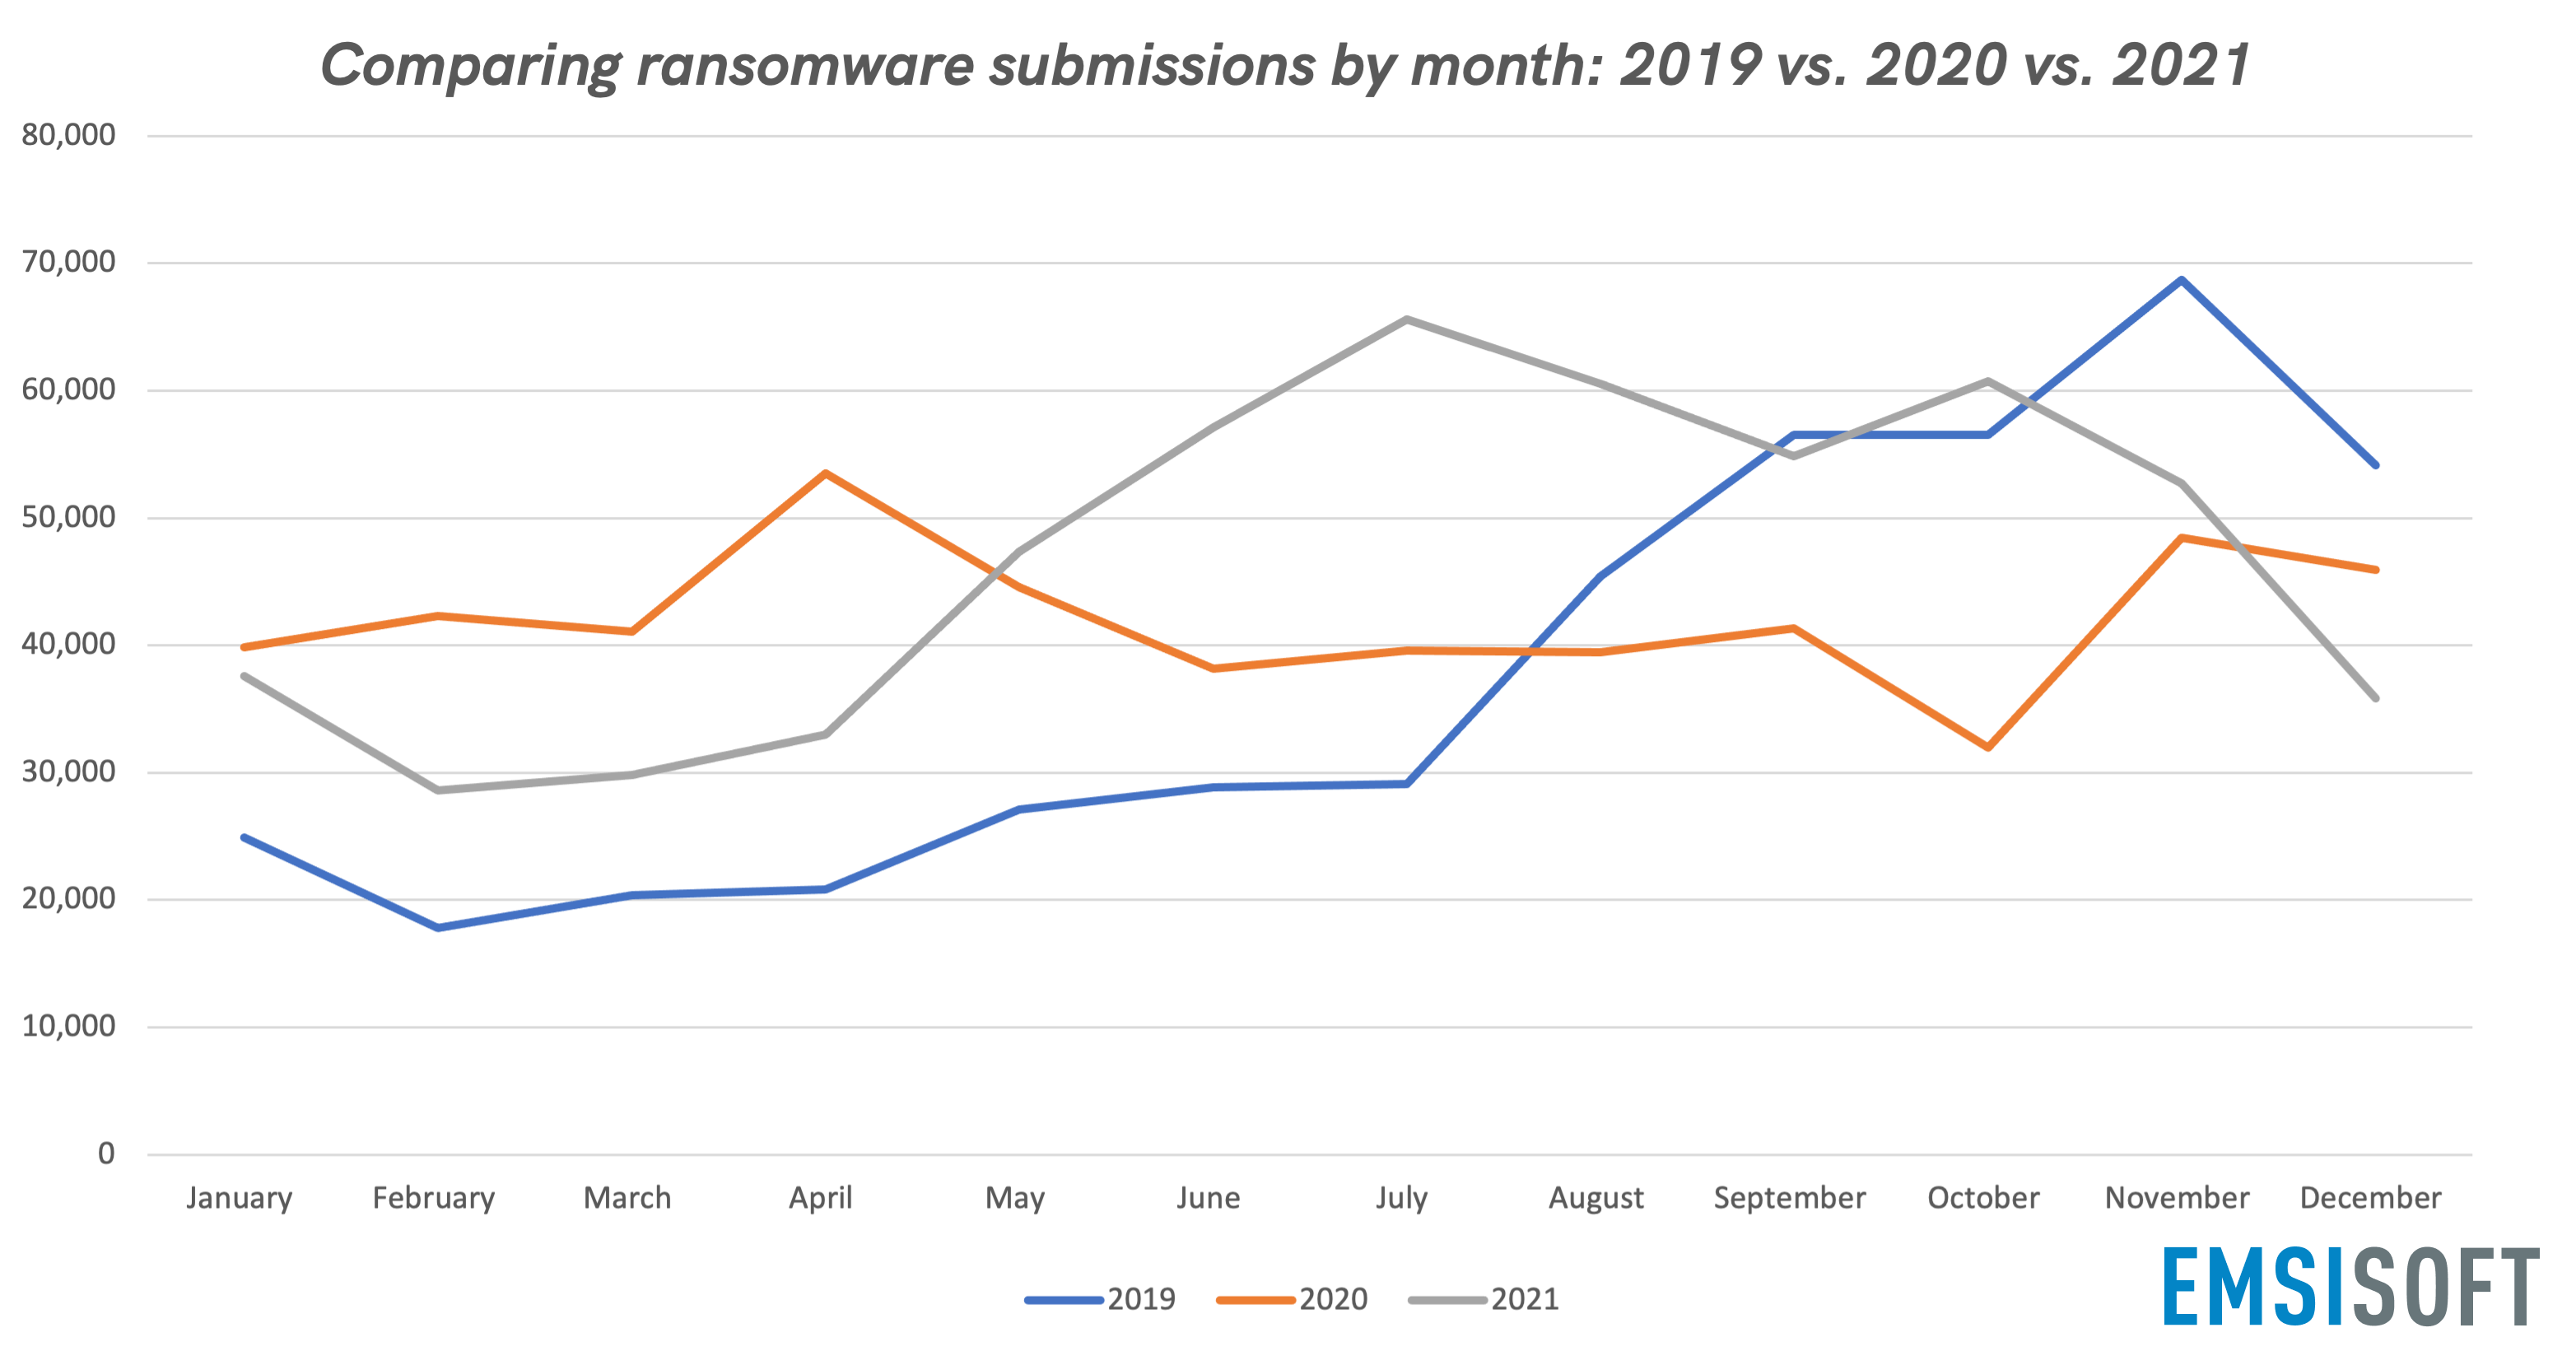 Comparing ransomware submissions by month: 2019 vs. 2020 vs. 2021